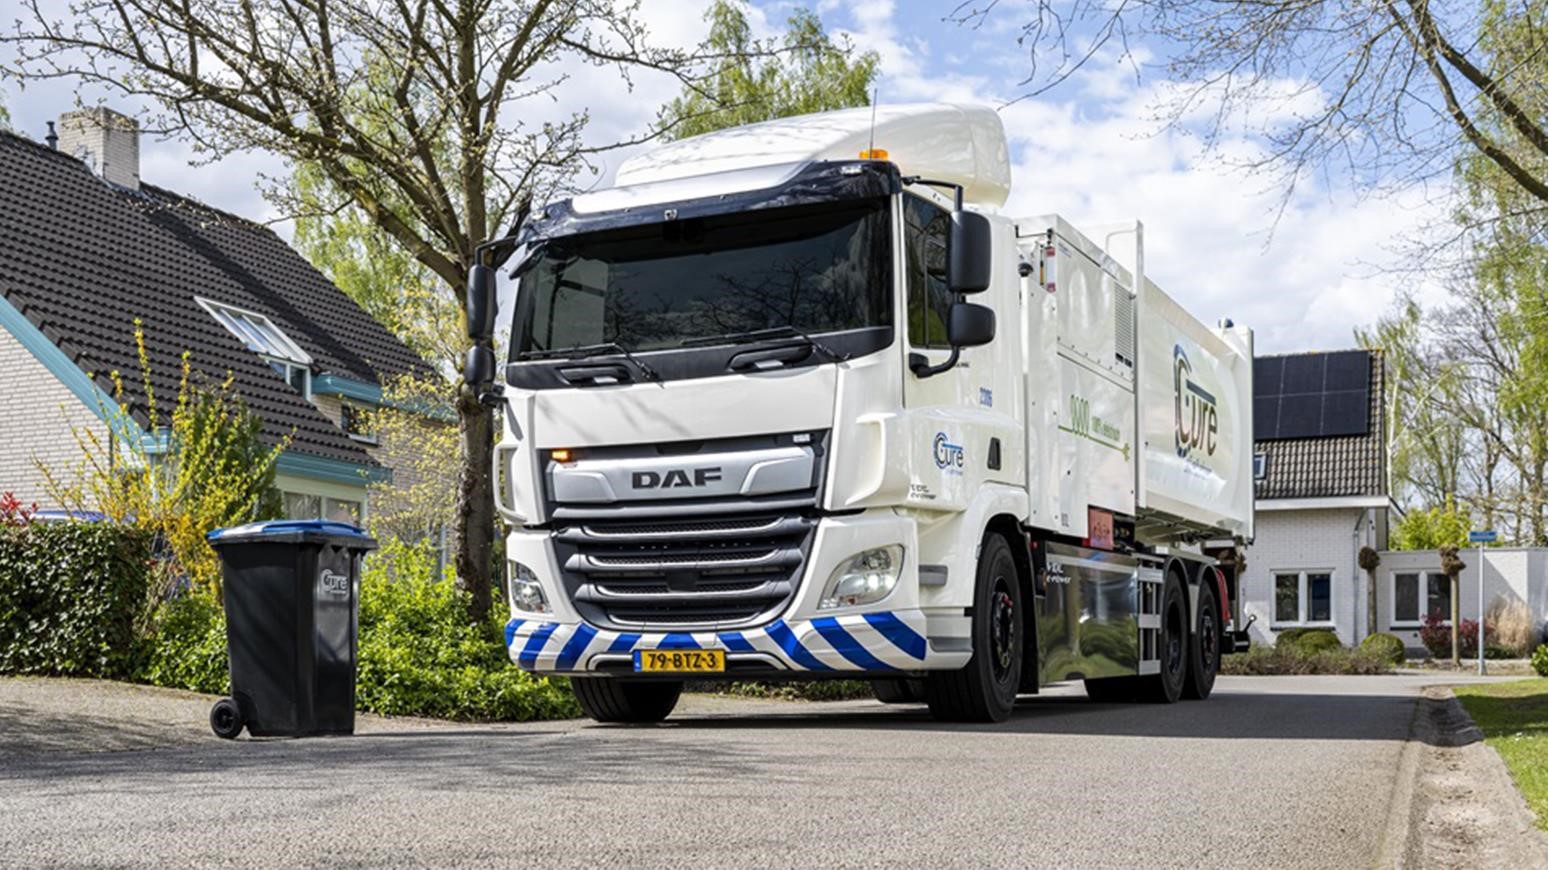 Cure Waste Management Goes Green With 14 Daf CF Electric Refuse Trucks